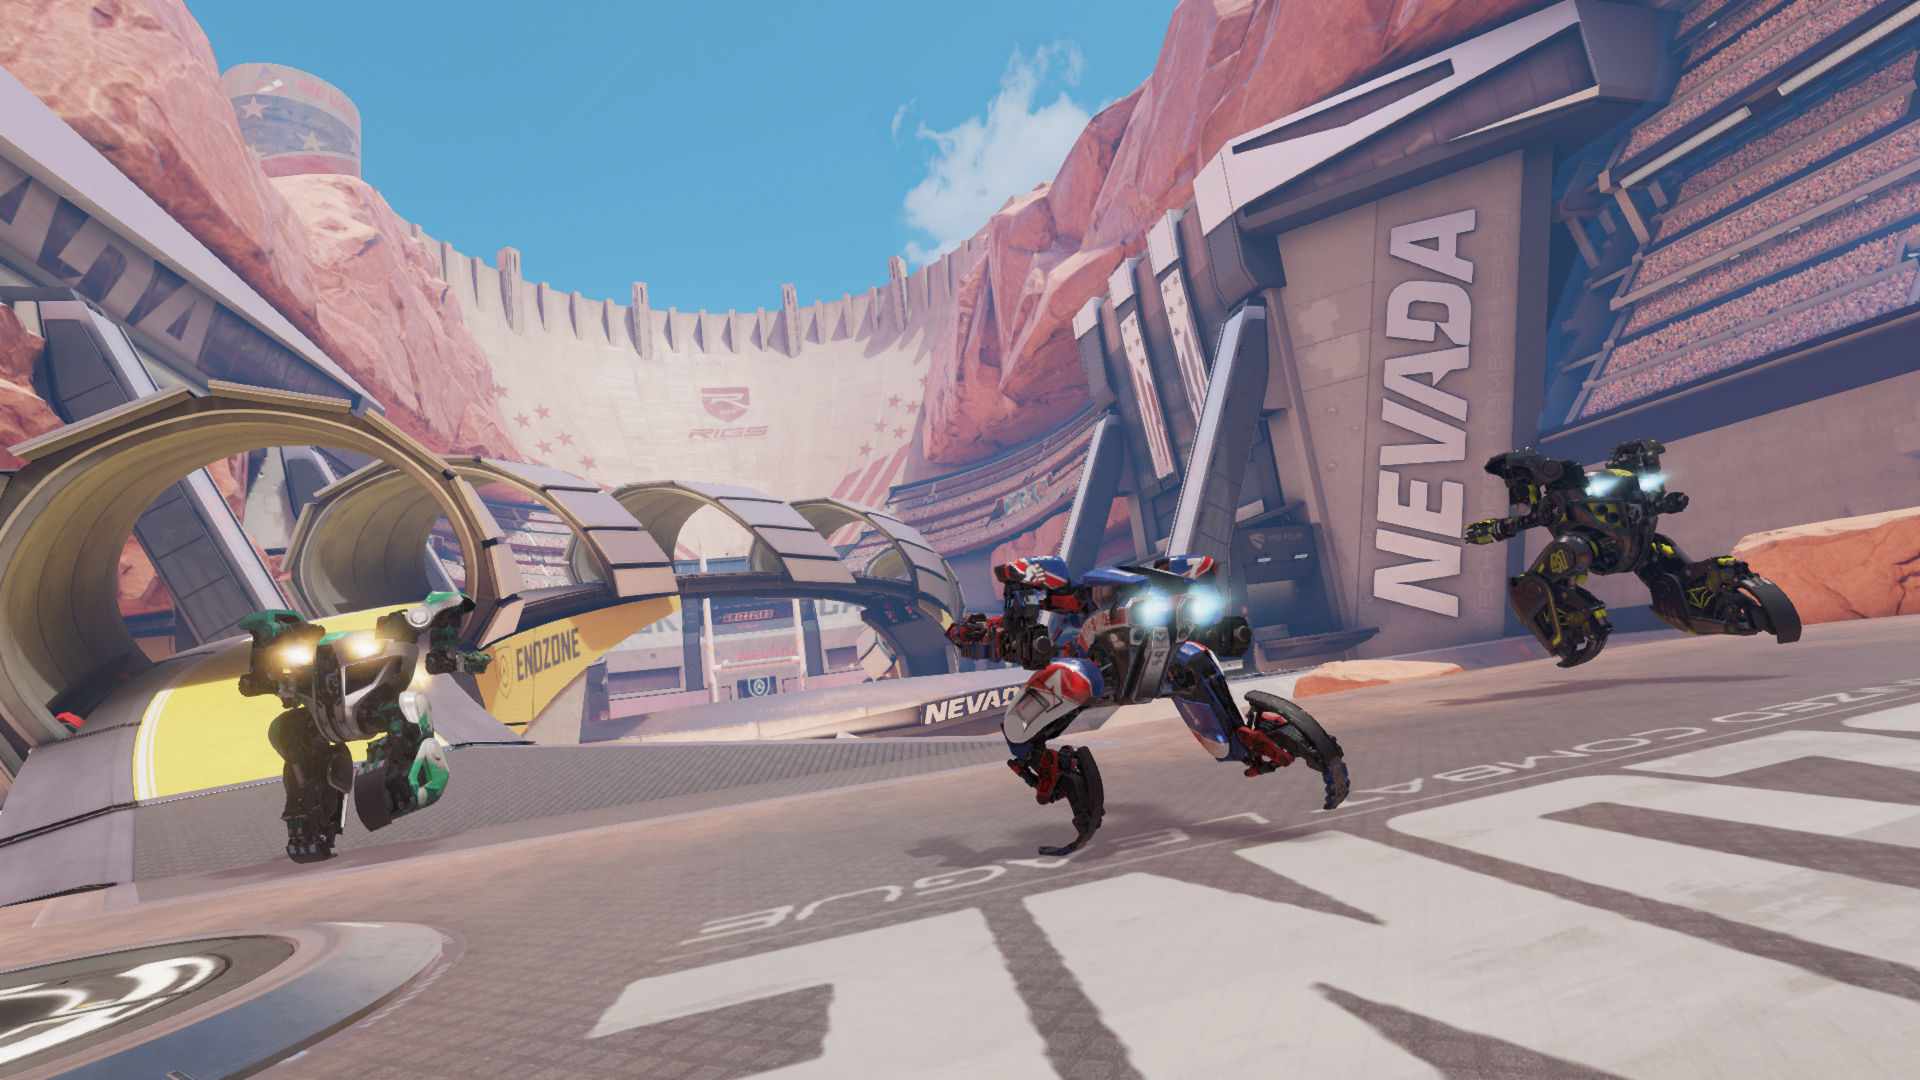 Скриншот *RIGS Mechanized Combat League [PS4 Exclusive VR Only] 5.05 / 6.72 [EUR] (2016) [Русский/Английский] (v1.07)*